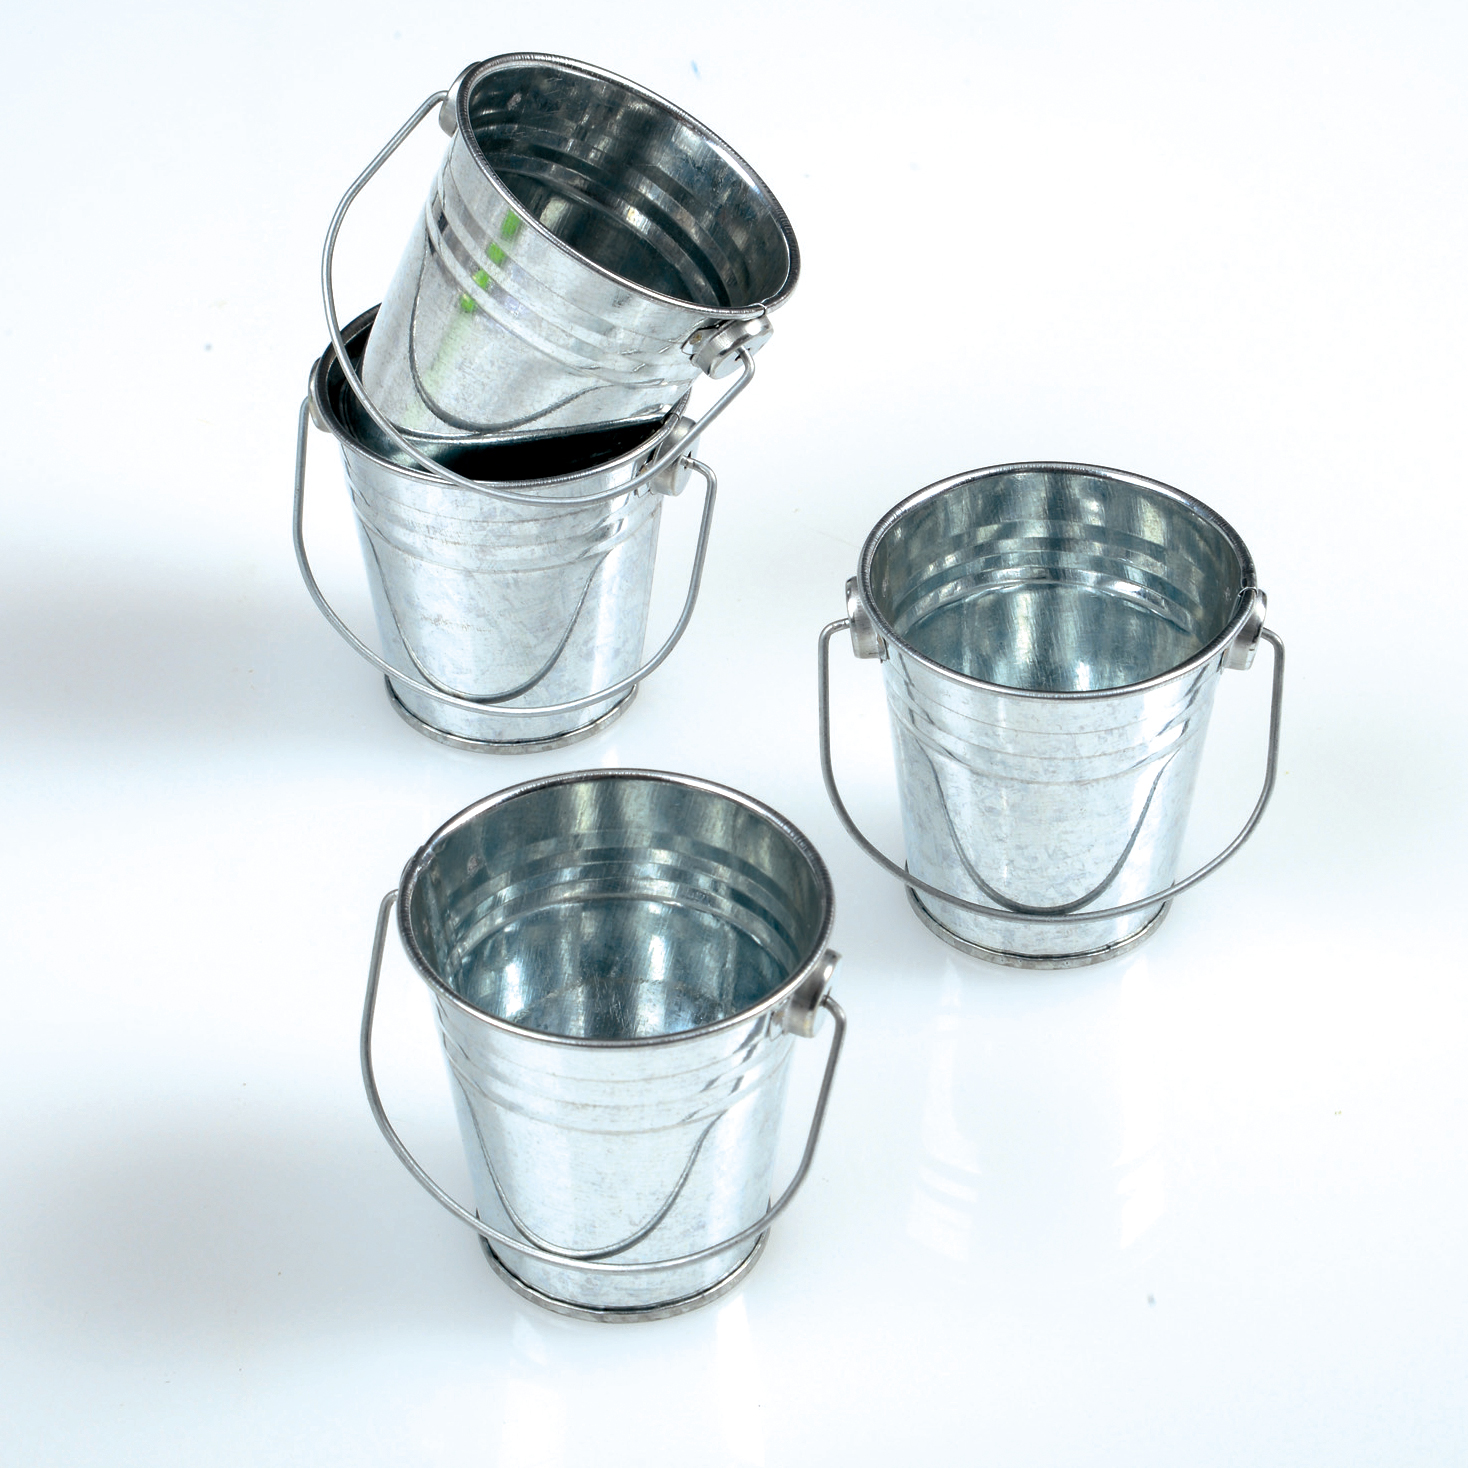 US Toy Mini Galvanized Metal Buckets 2.5" Party Favor, Silver, 12 Pack